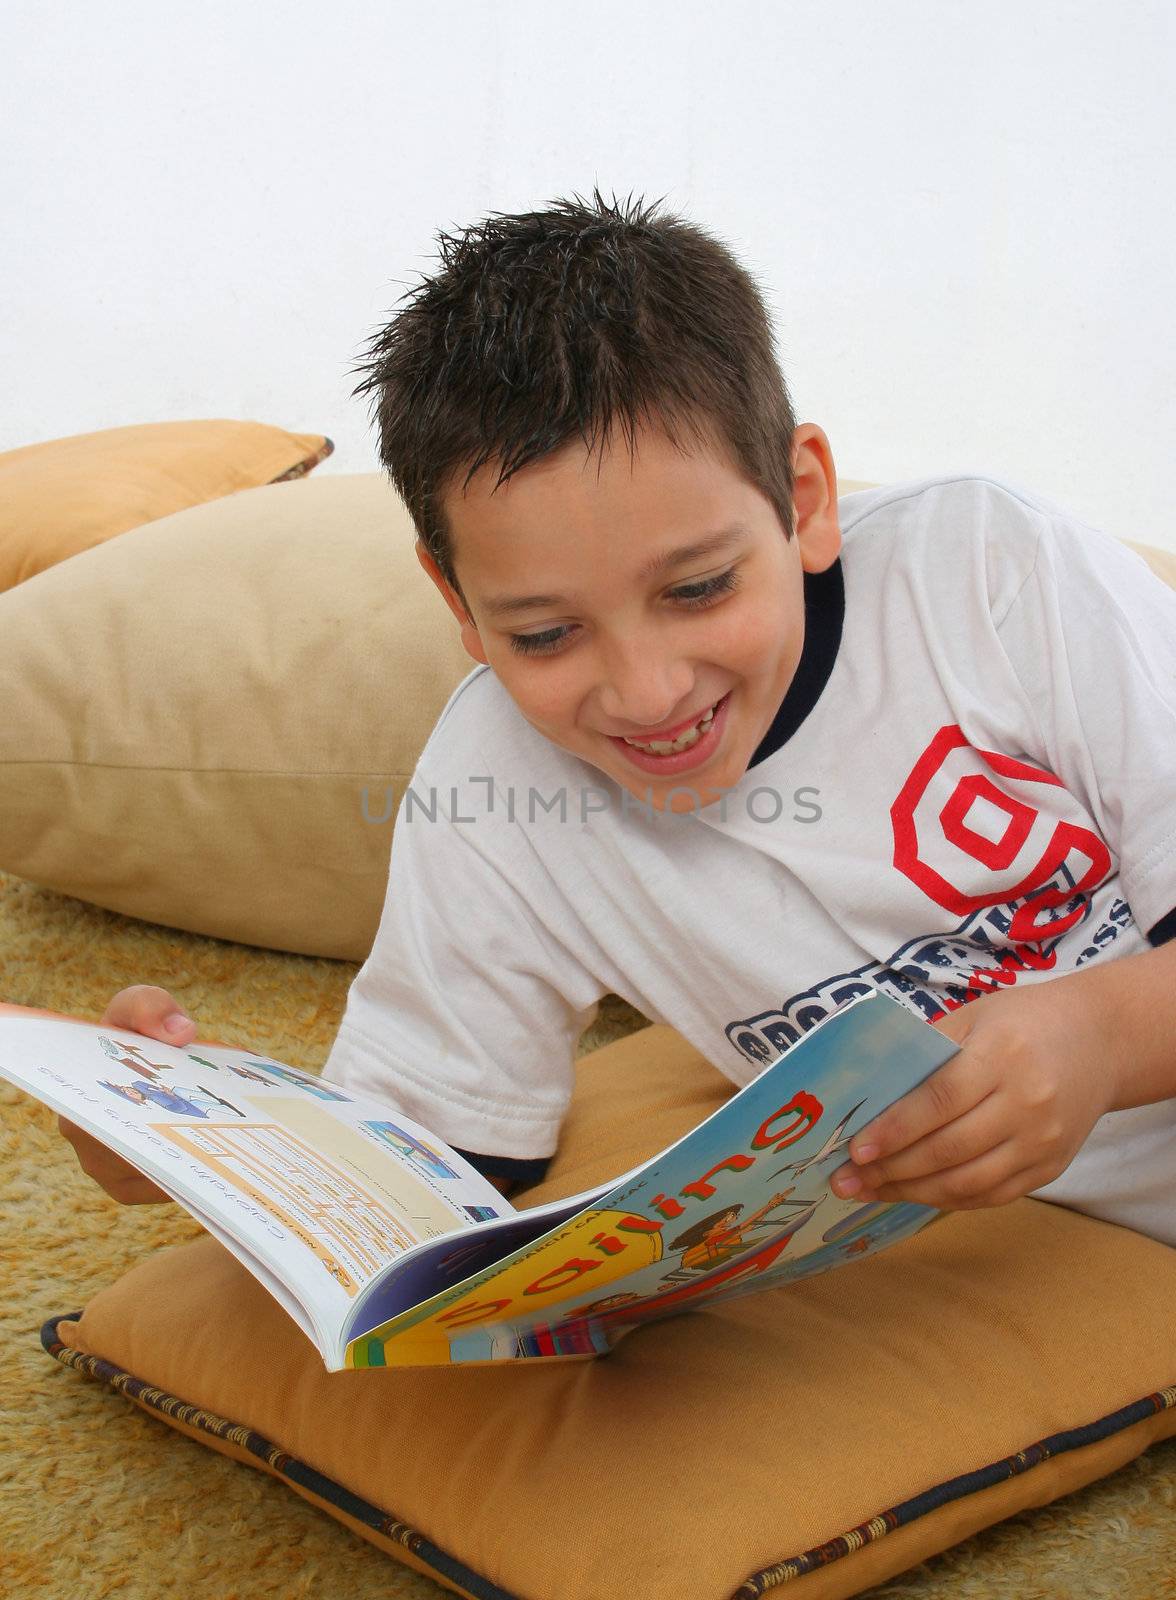 Boy reading a book on the floor by Erdosain